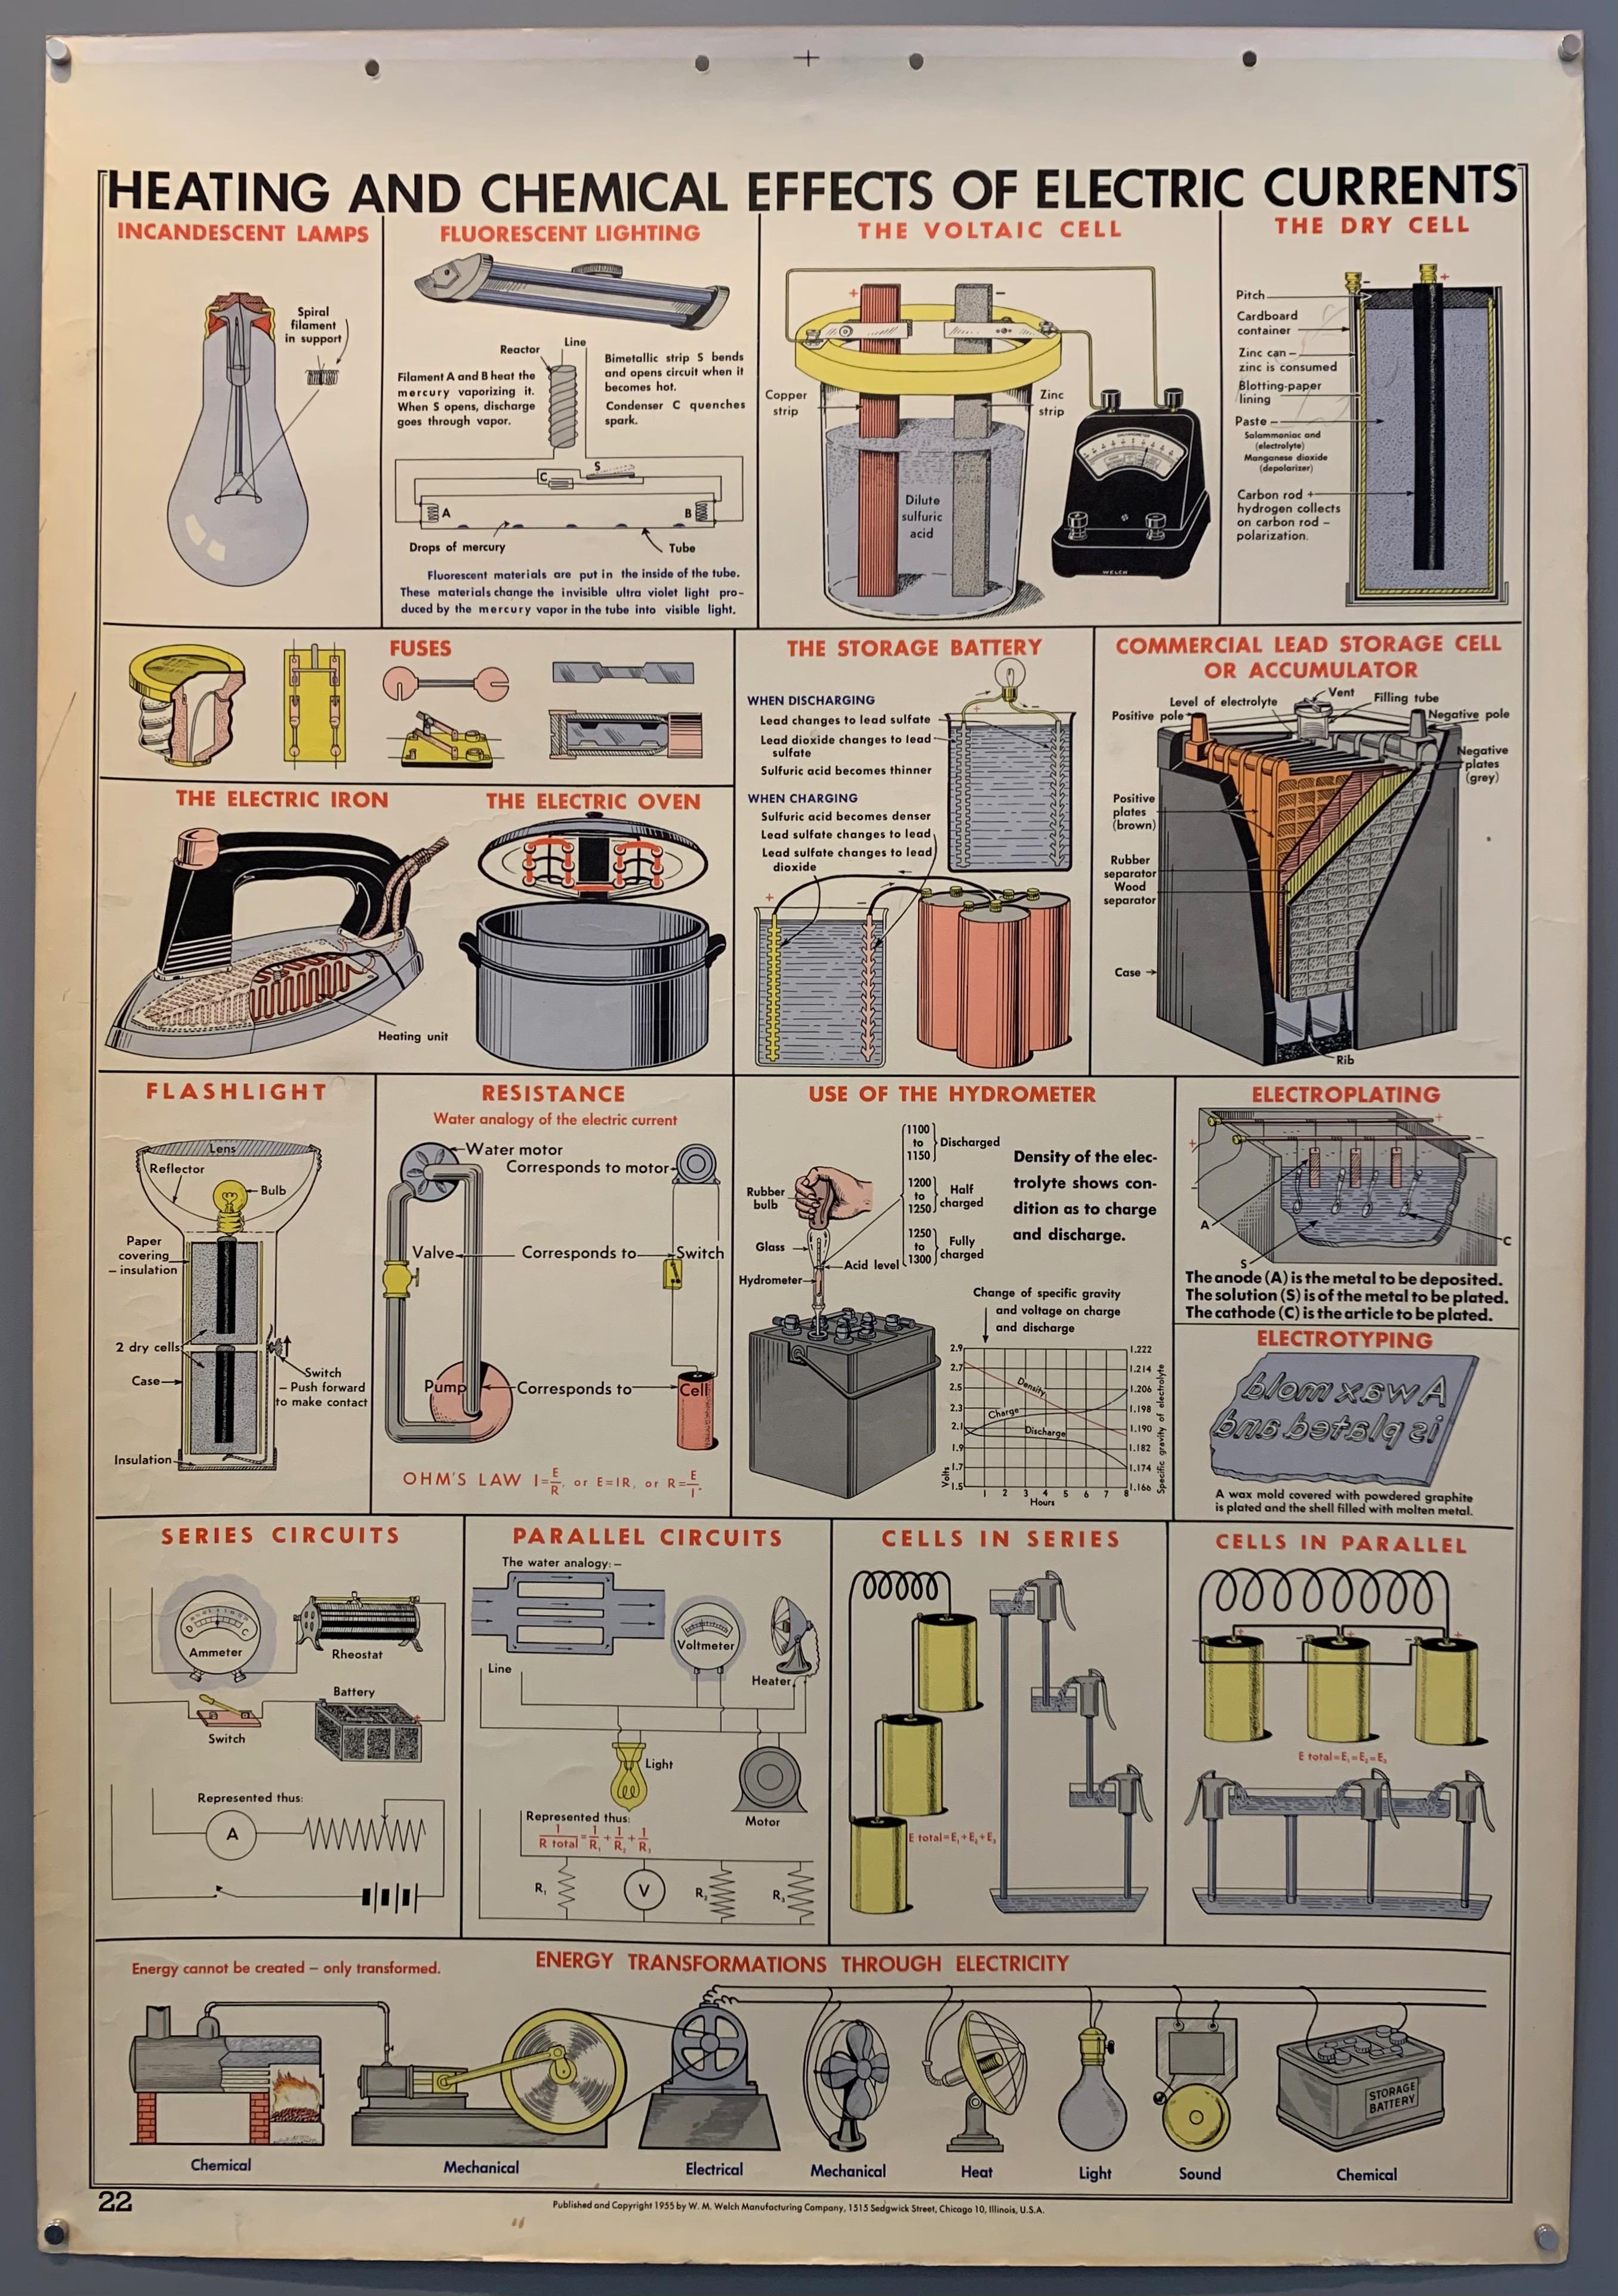 Heating and Chemical Effects of Electric Currents Wall Chart (b)